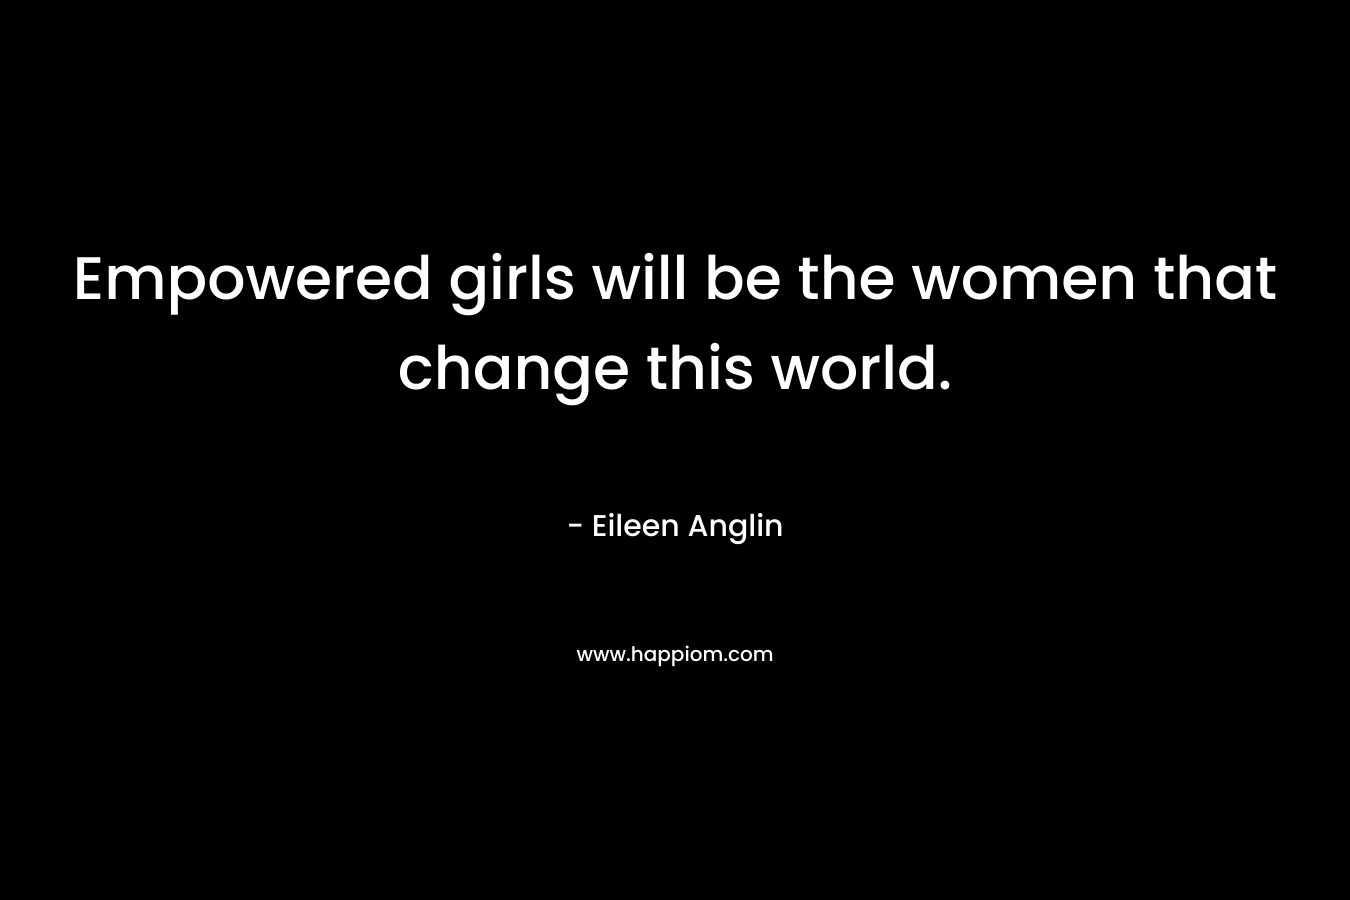 Empowered girls will be the women that change this world.